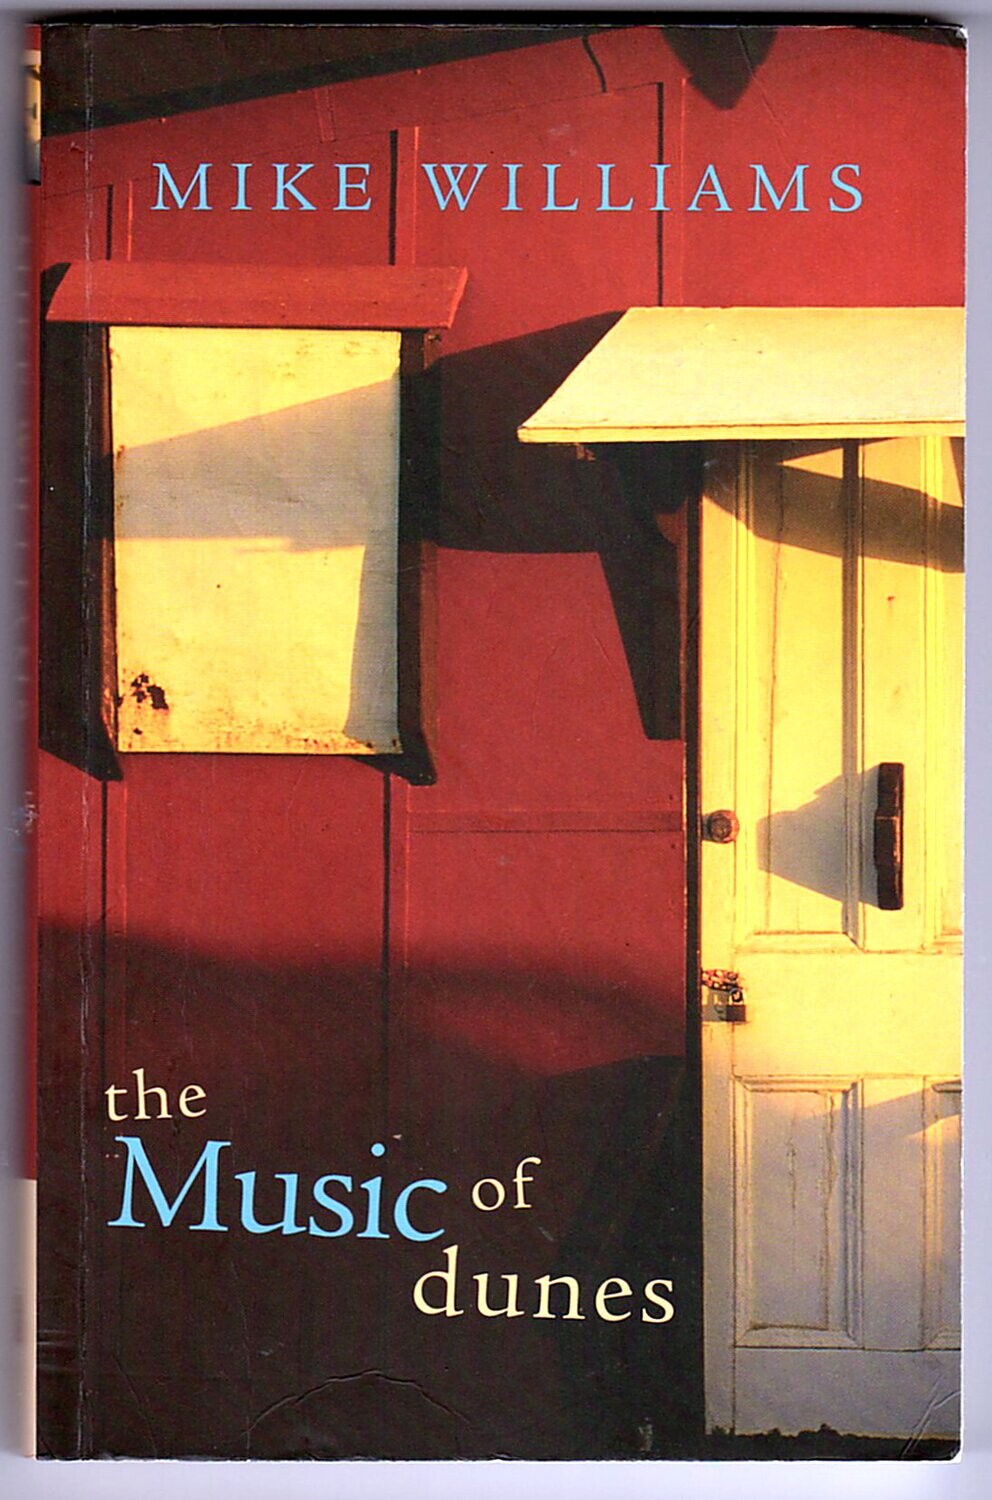 The Music of Dunes by Mike Williams